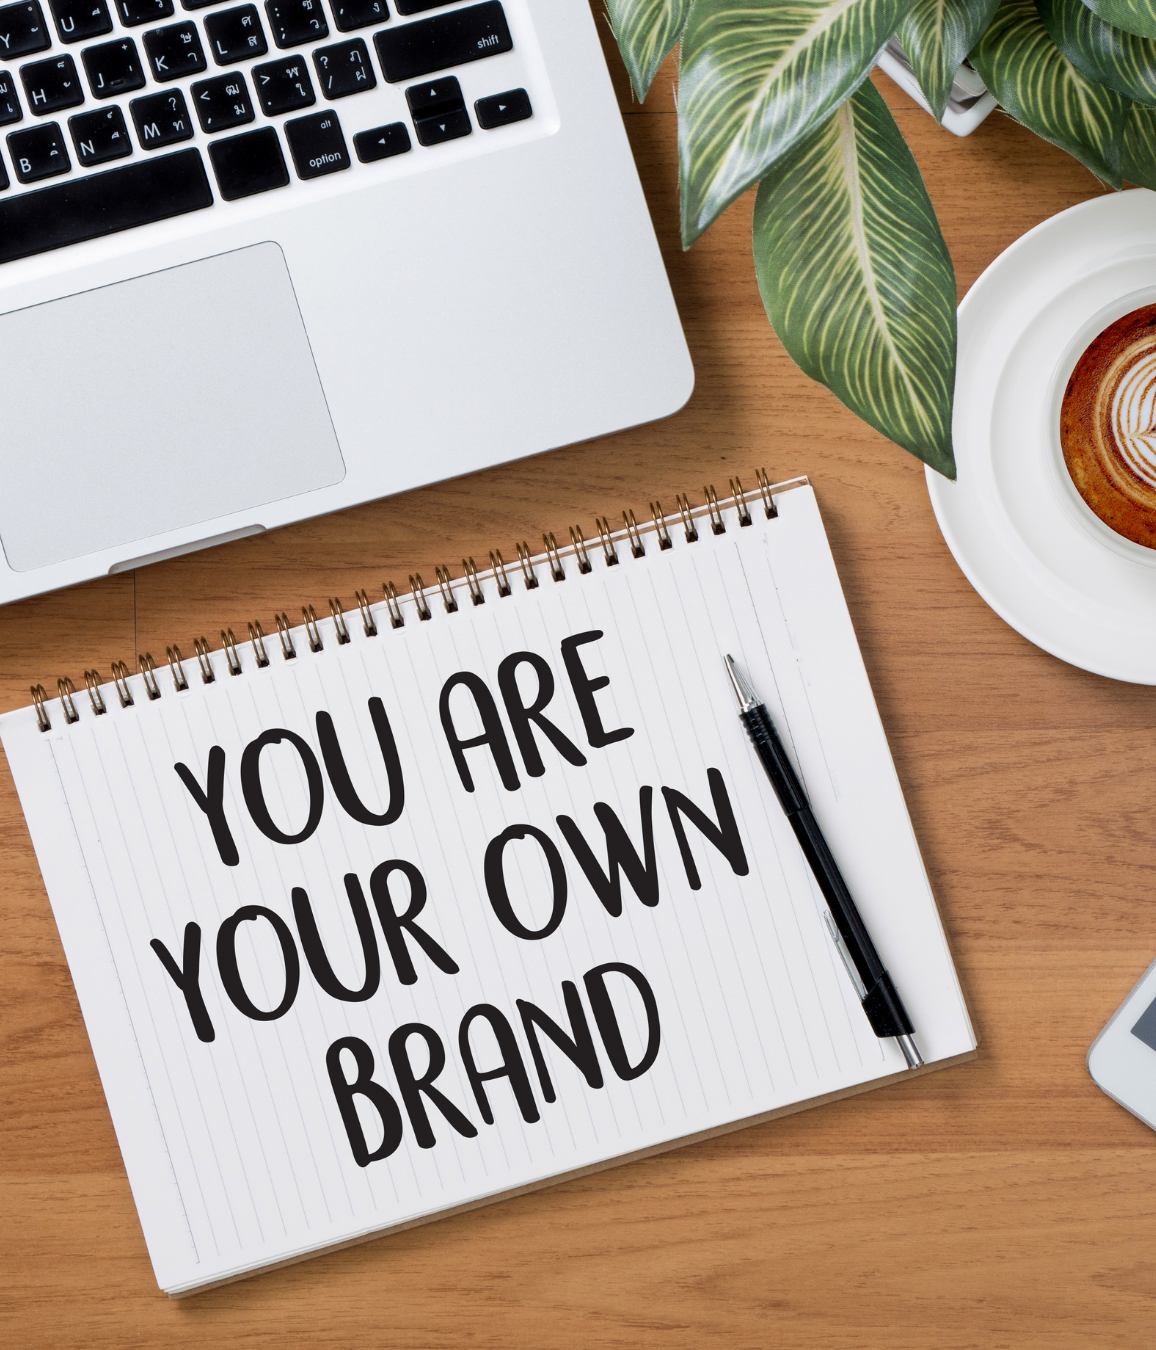 You are your own brand!